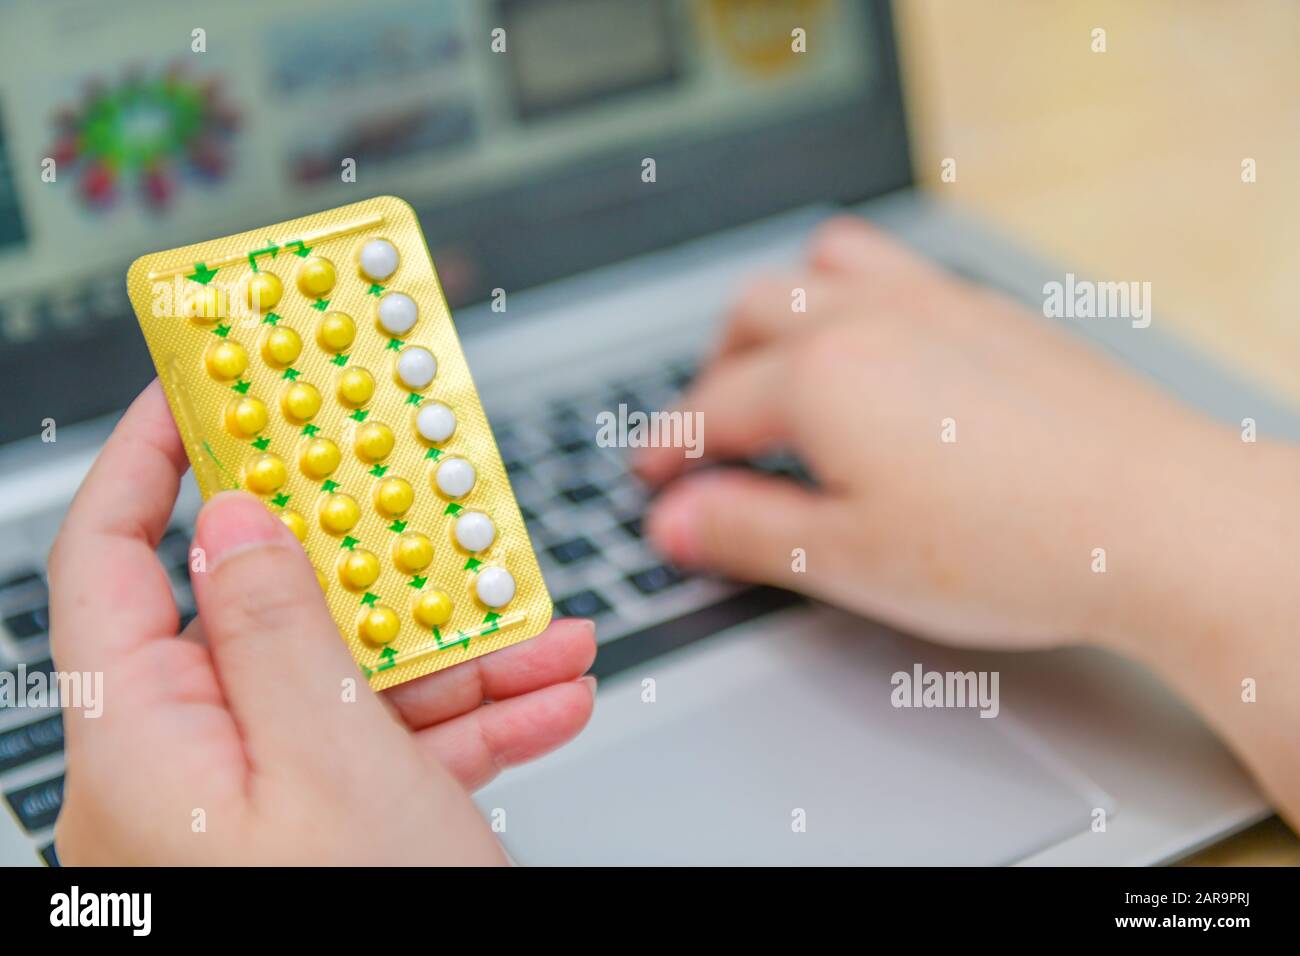 Pharmacist using the computer laptop in chemist shop or pharmacy drug store. Hand holding birth control pills pack and key the prescription order. Stock Photo